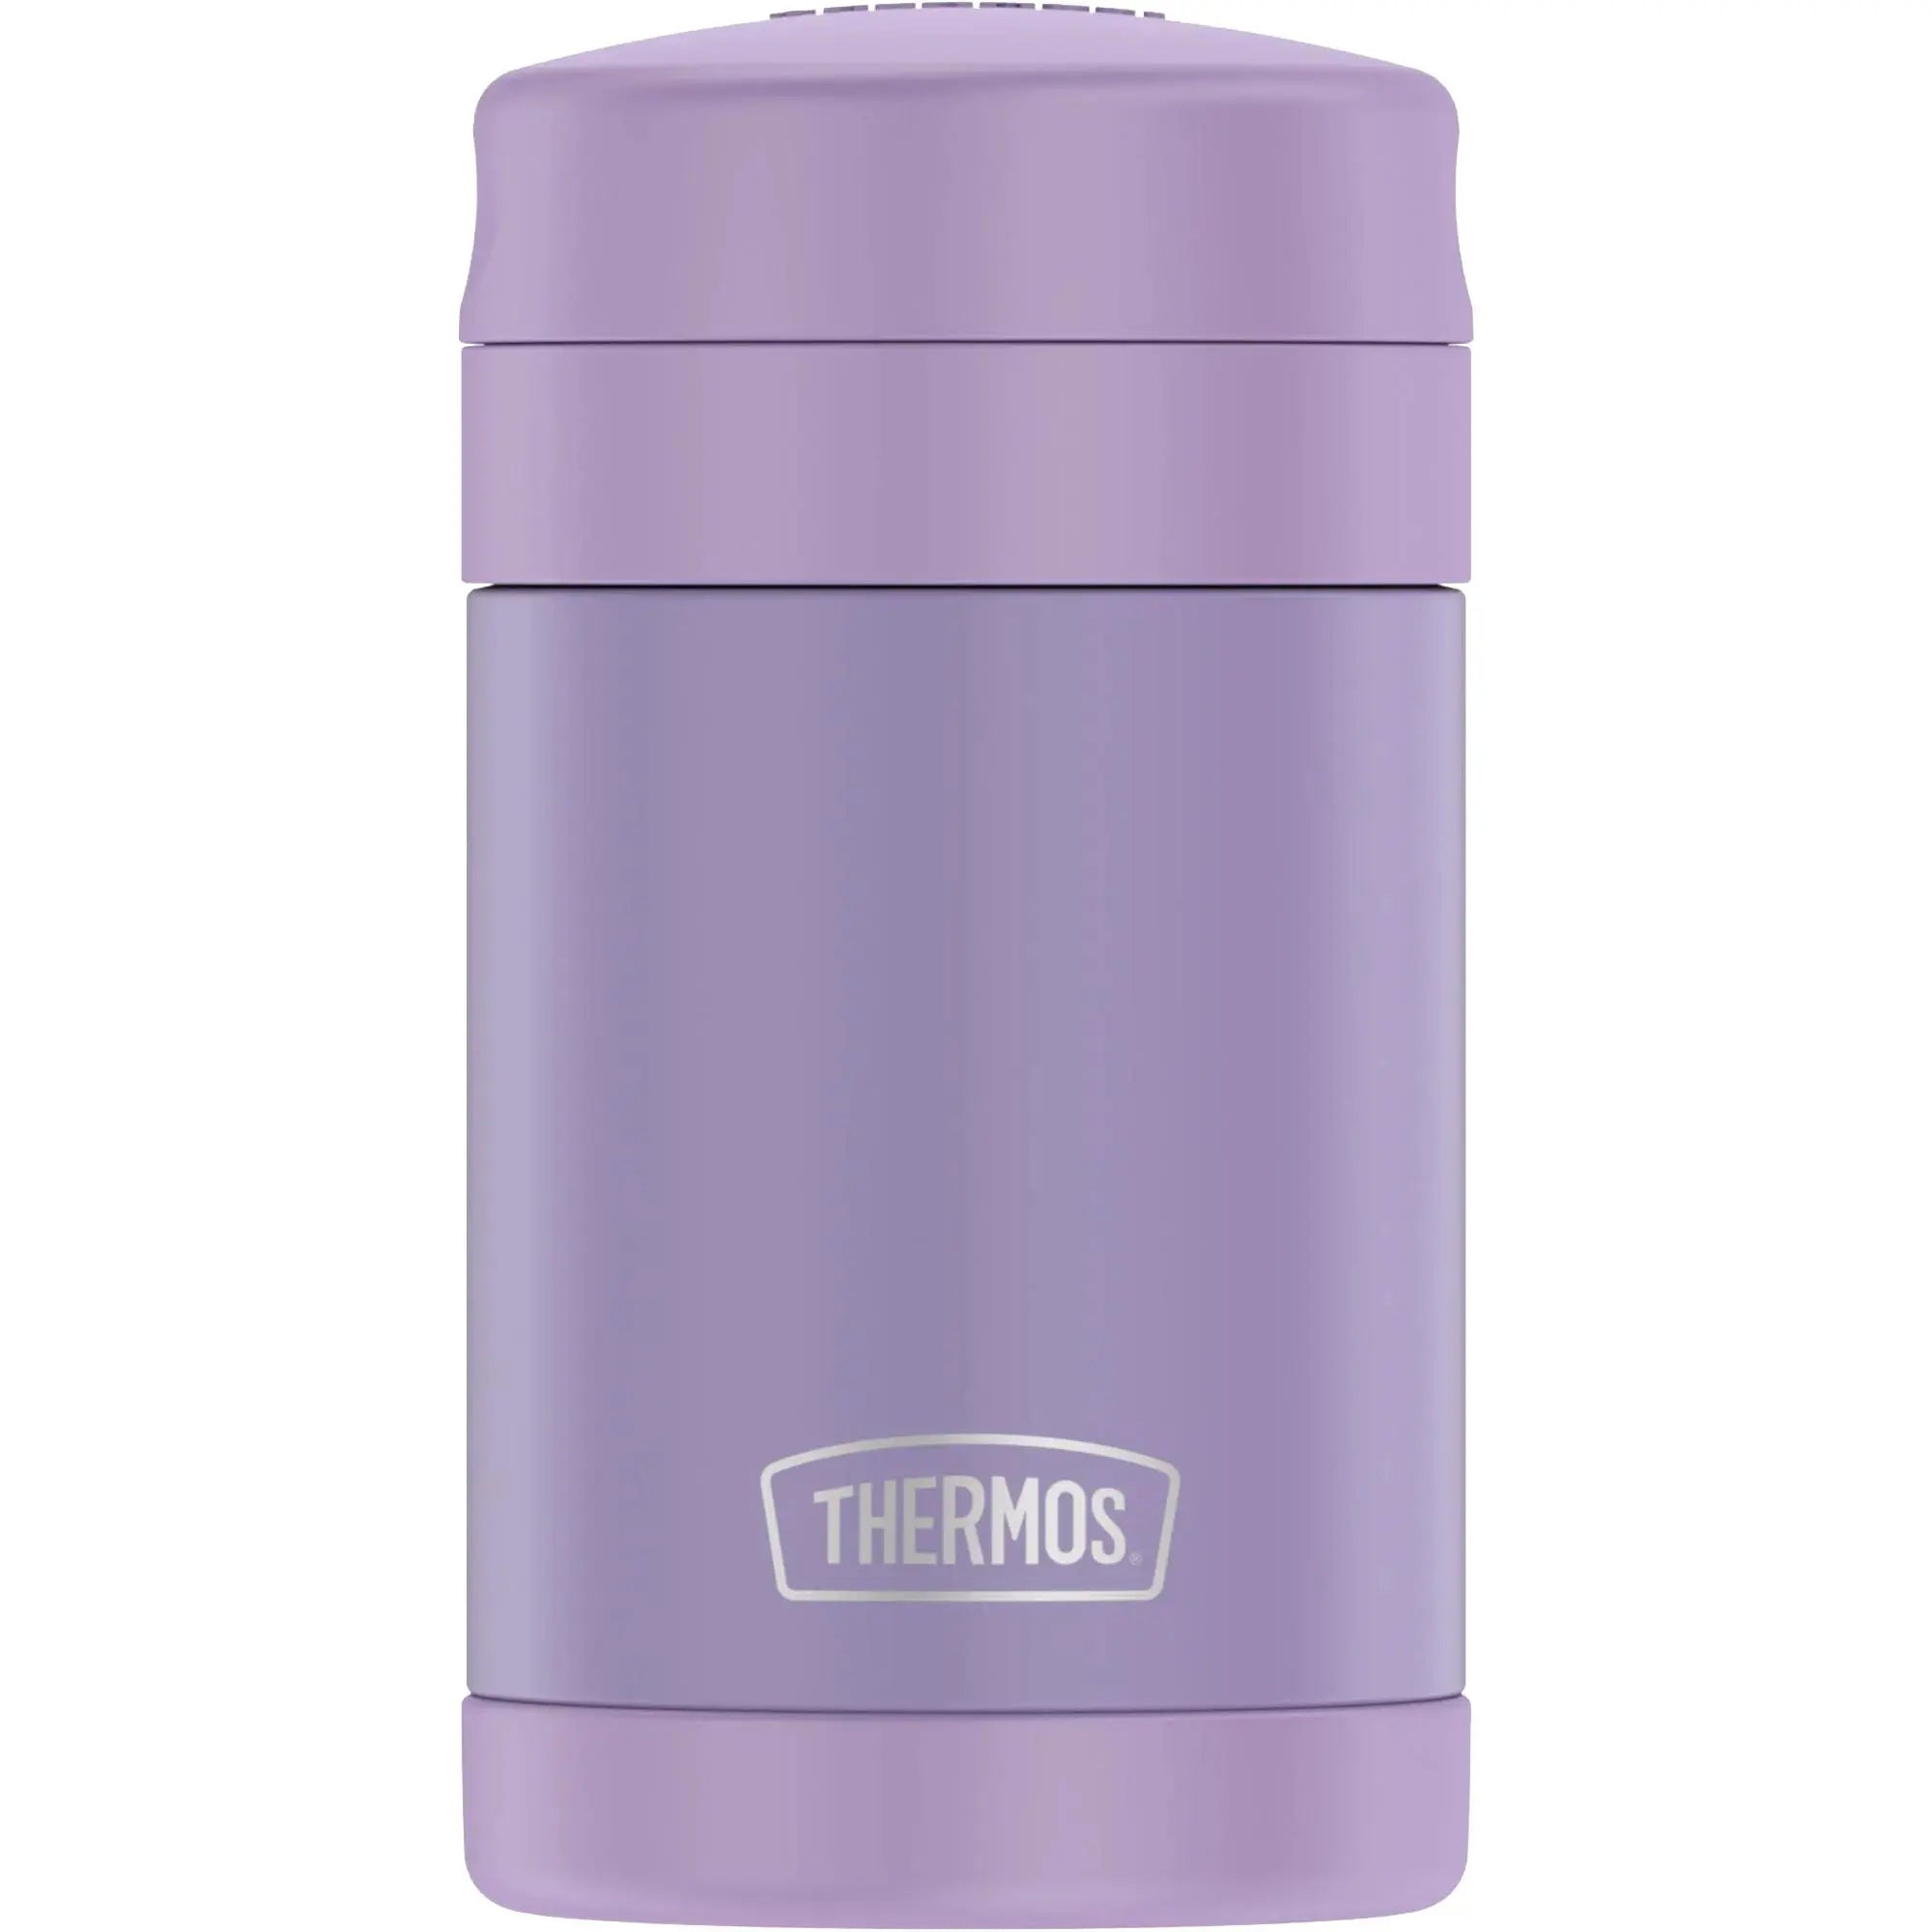 Thermos 16 oz. Vacuum Insulated Stainless Steel Food Jar with Spoon - Lavender Thermos